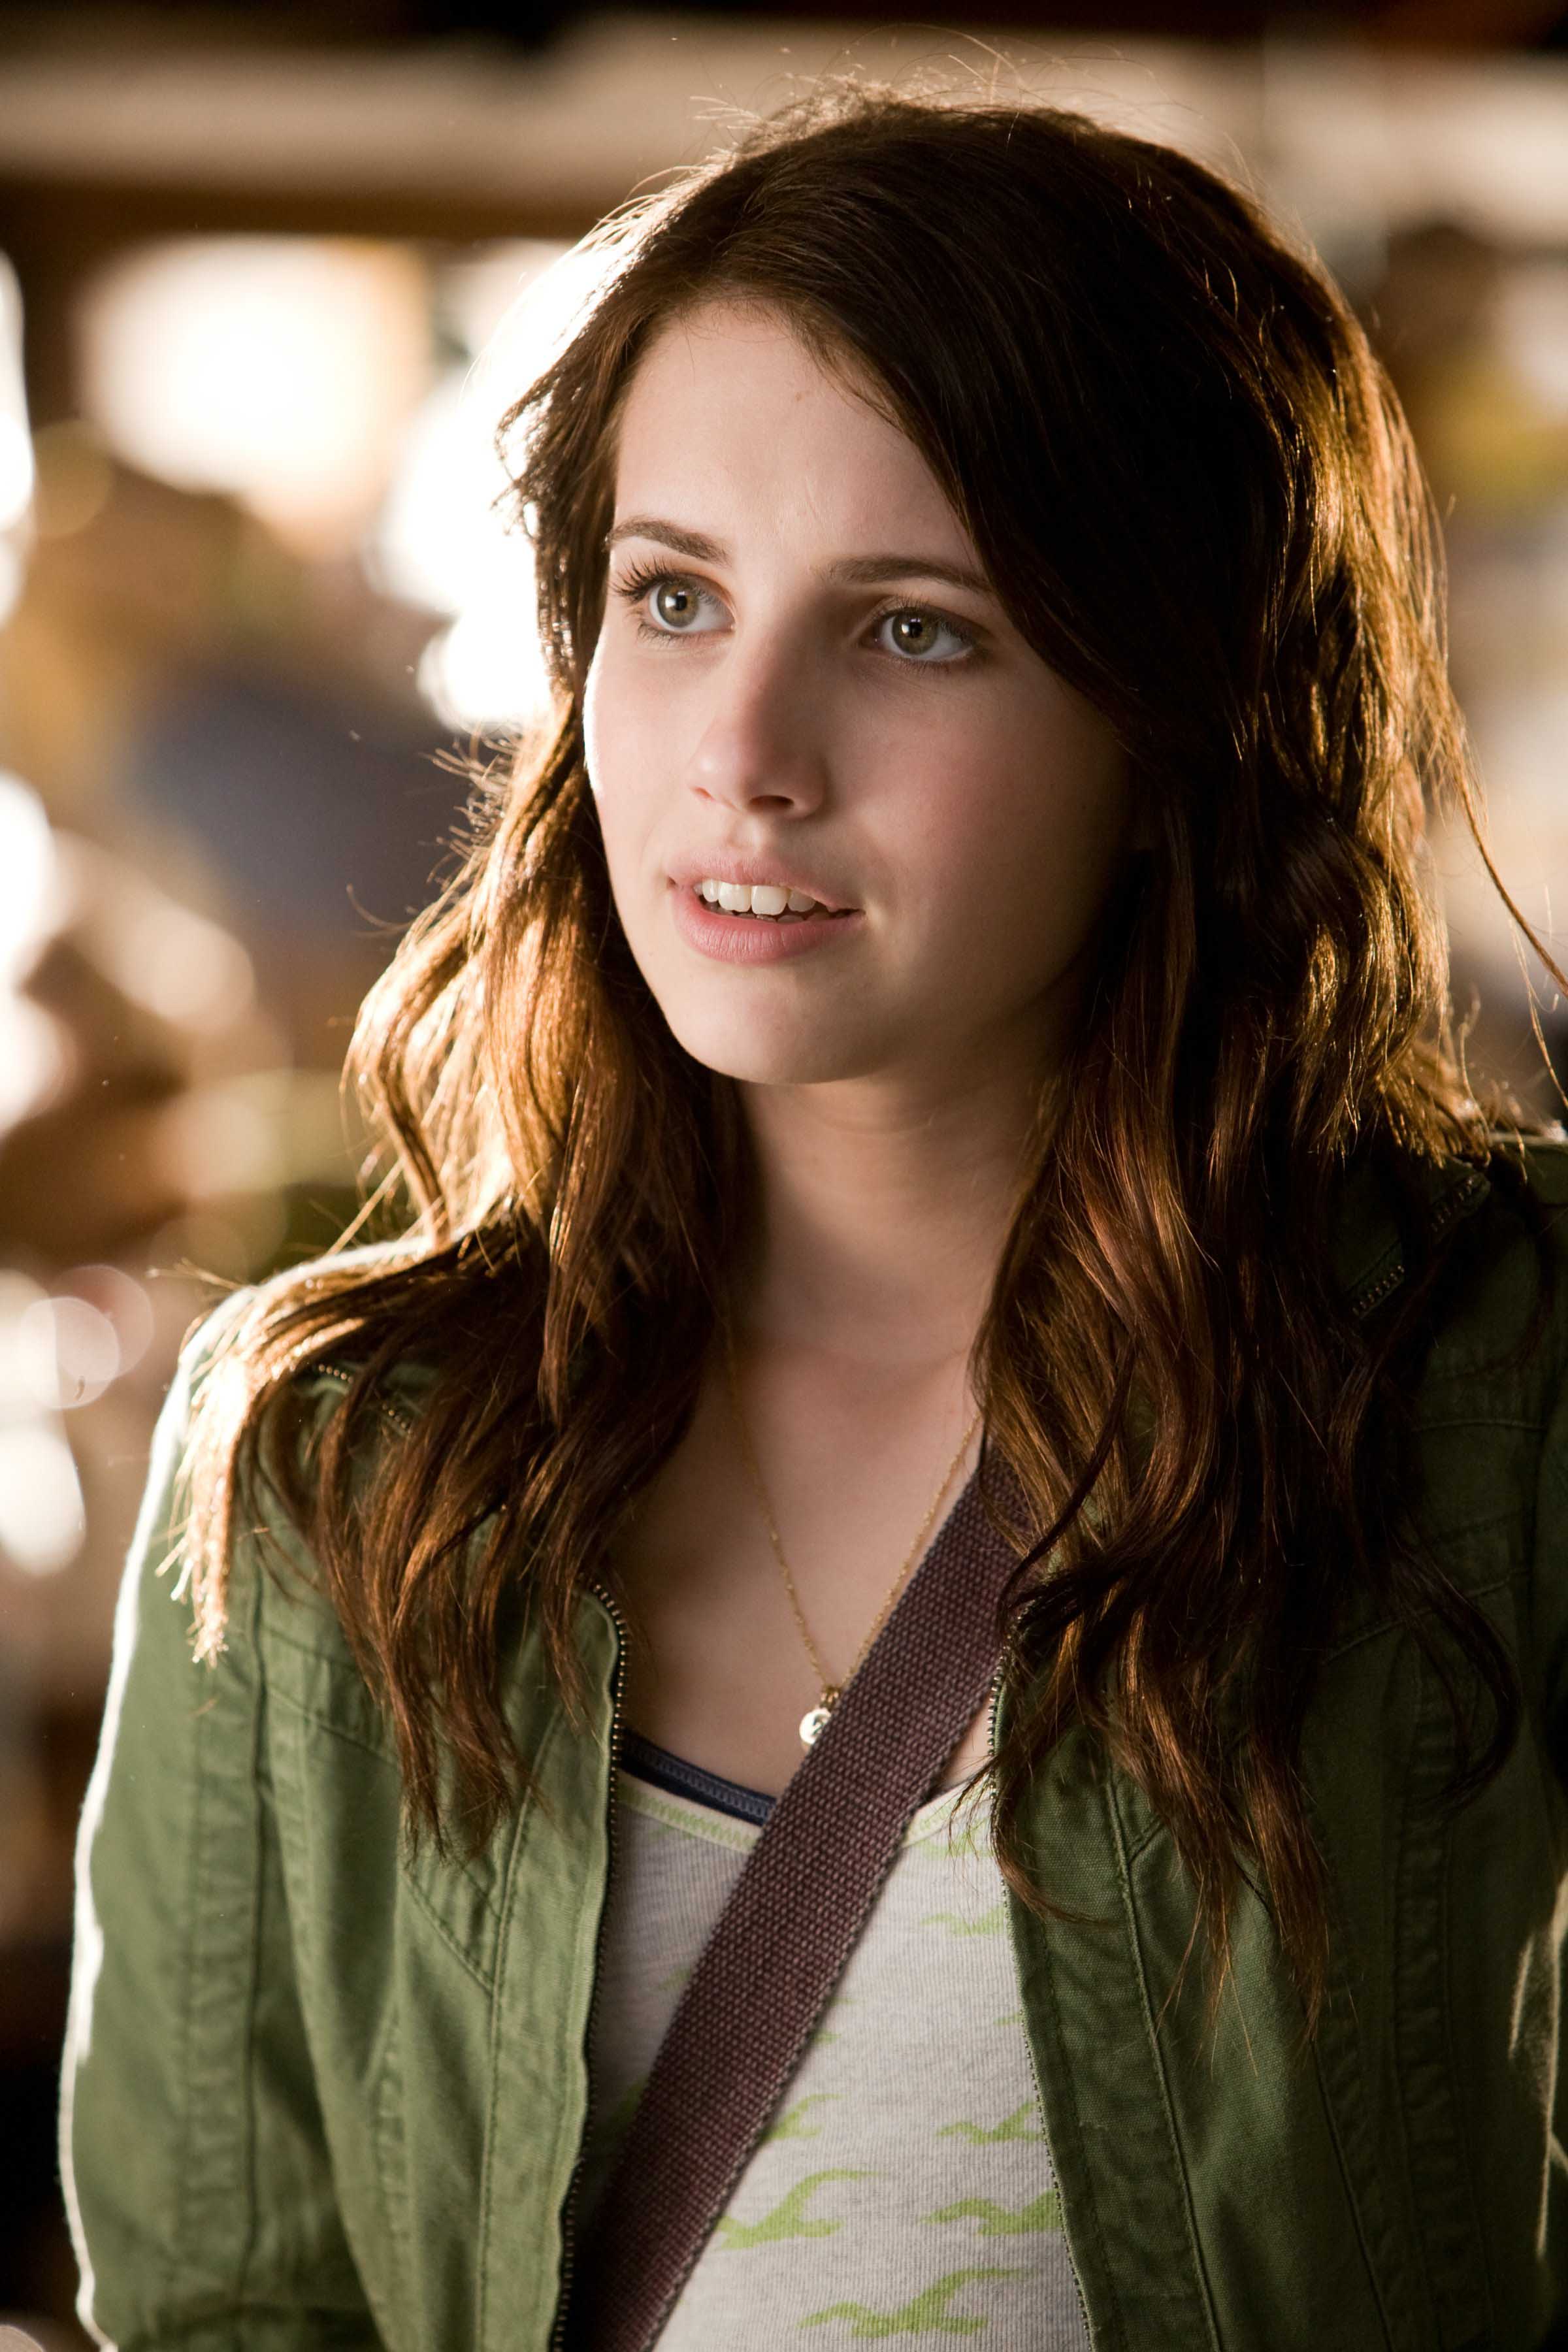 Emma Roberts in Hotel for Dogs